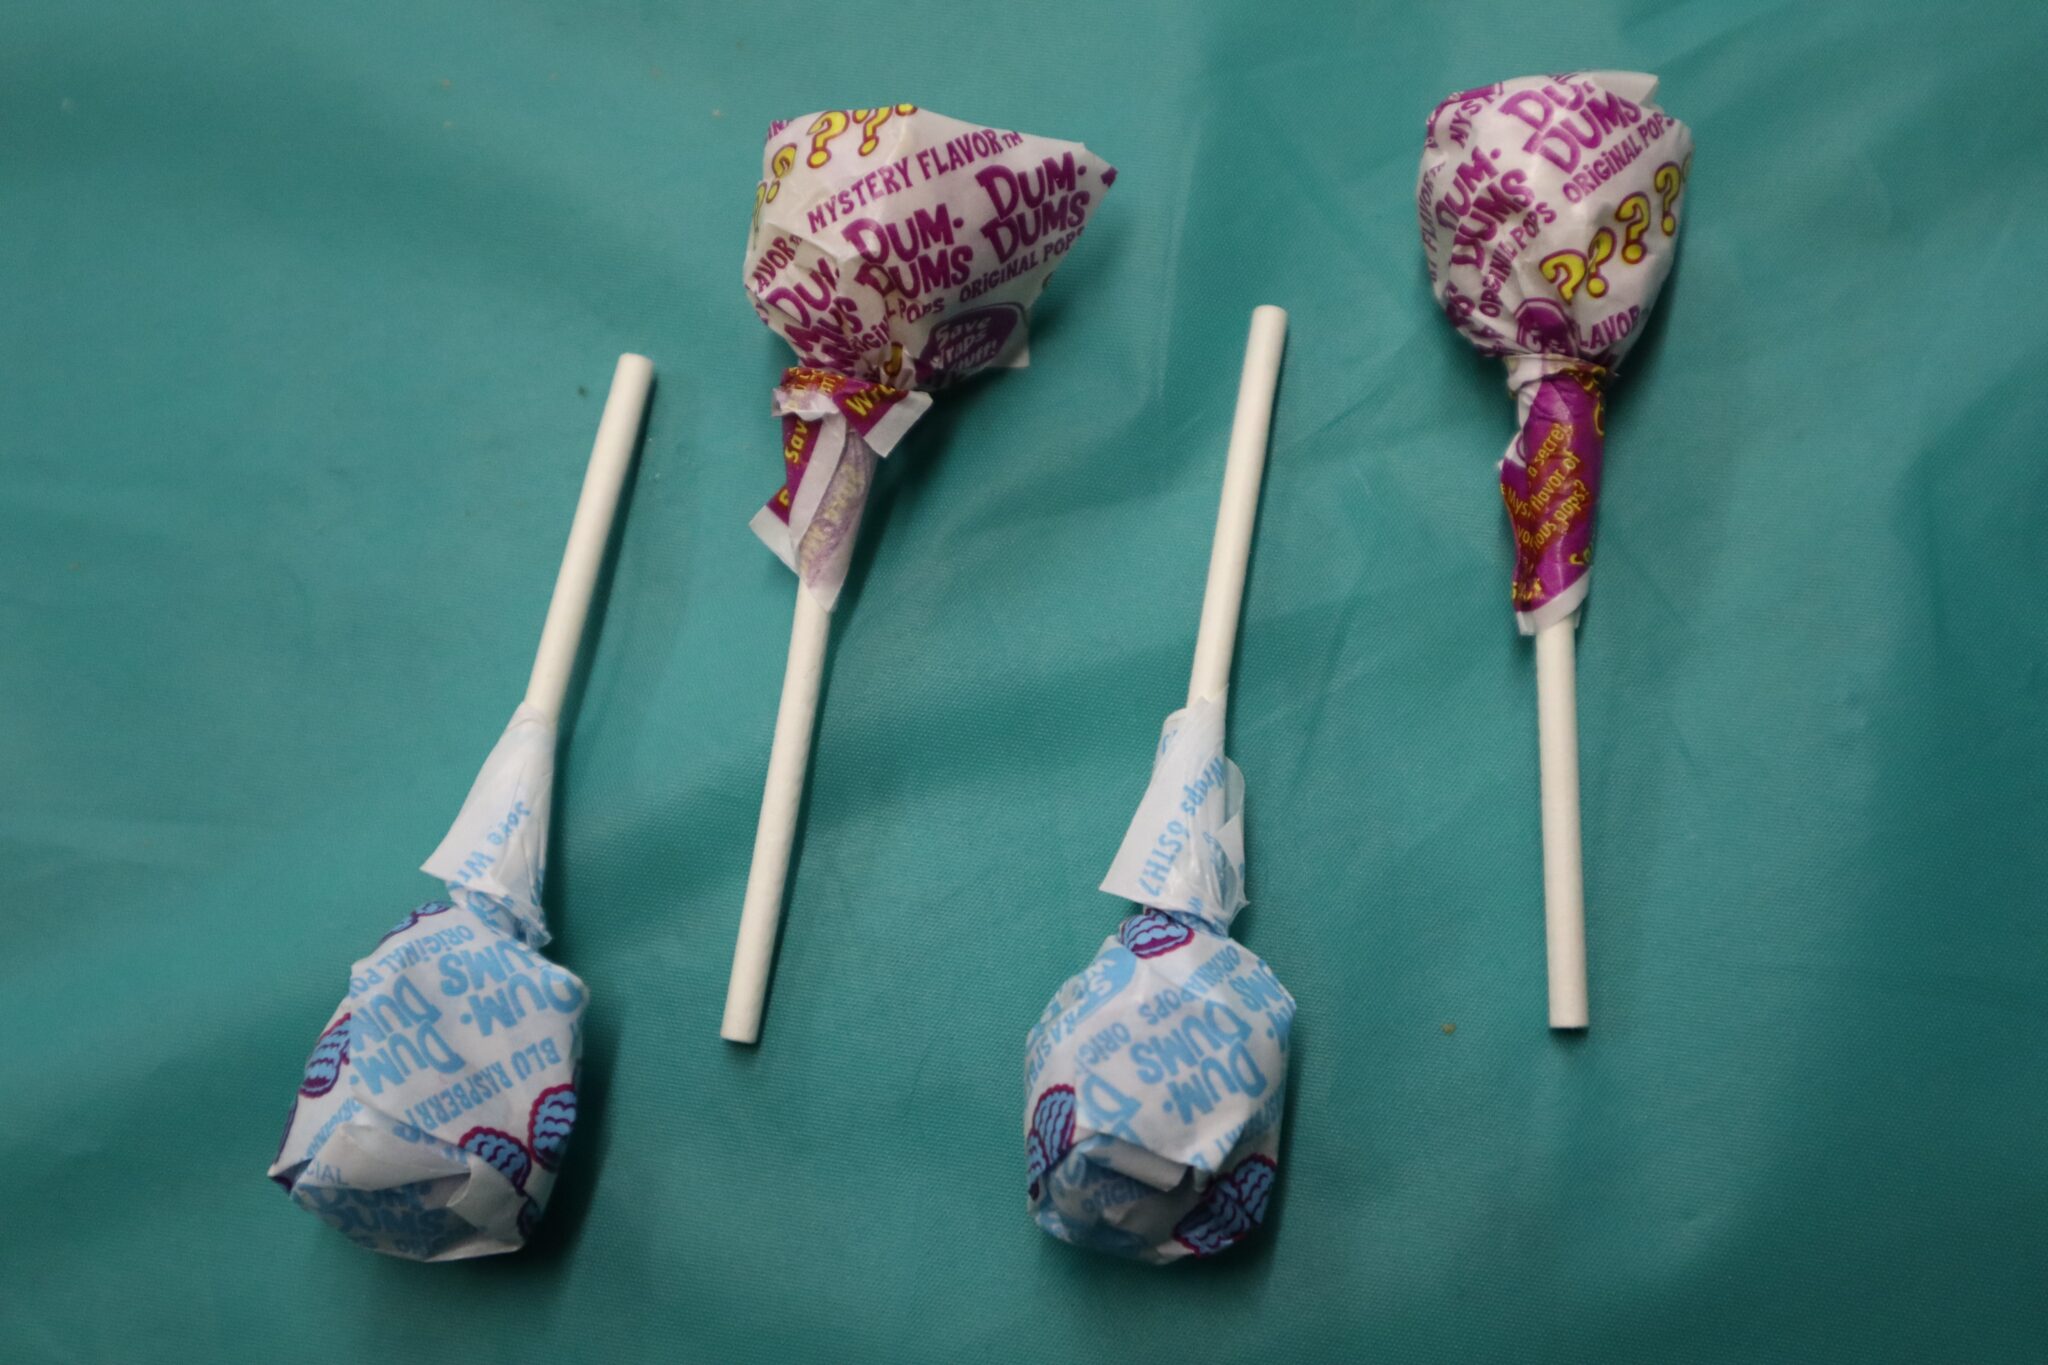 Have You Ever Wondered What Flavor The Mystery Flavored Dum Dums Is?